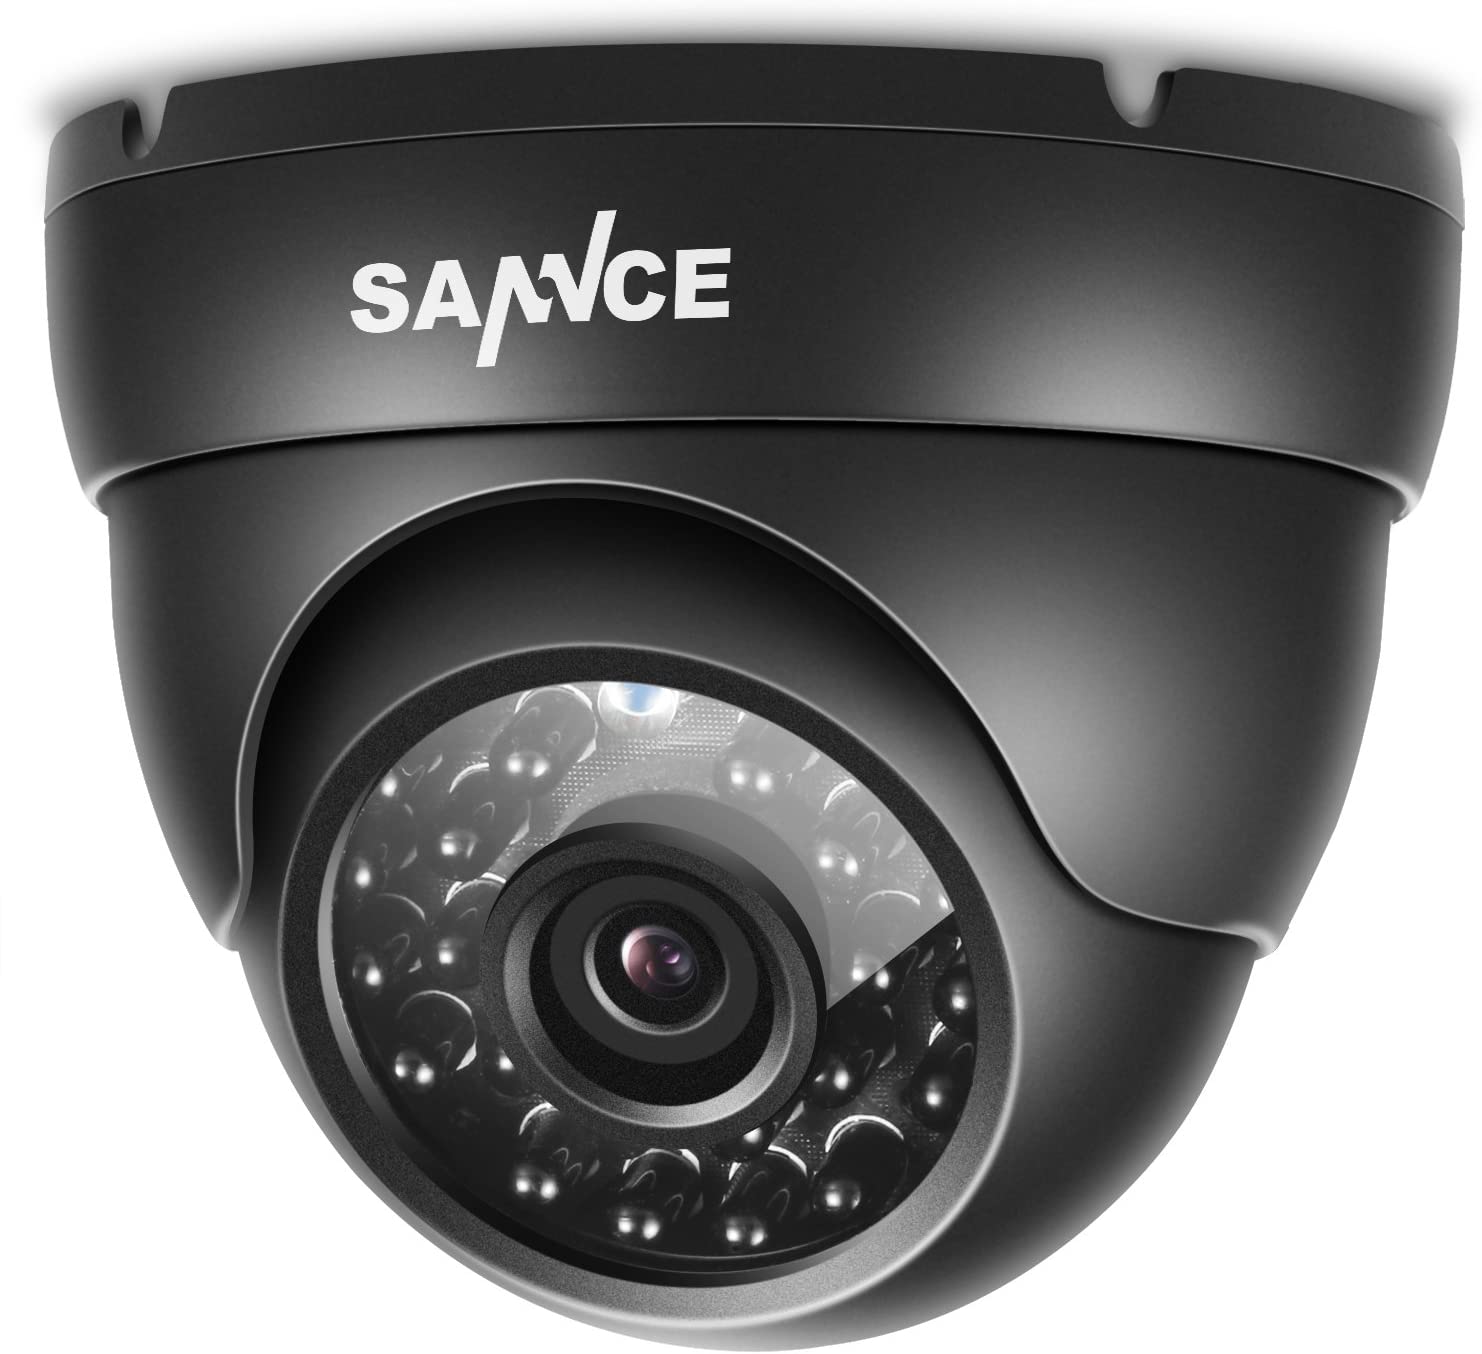 SANNCE Security Camera: 960H Dome Security Camera w/ Night Vision & IR Cut Filter $14.22, 1080p 8 Channel WiFi NVR with 4 PCS IP Cameras $142.16, More + Free Shipping w/ Prime or $